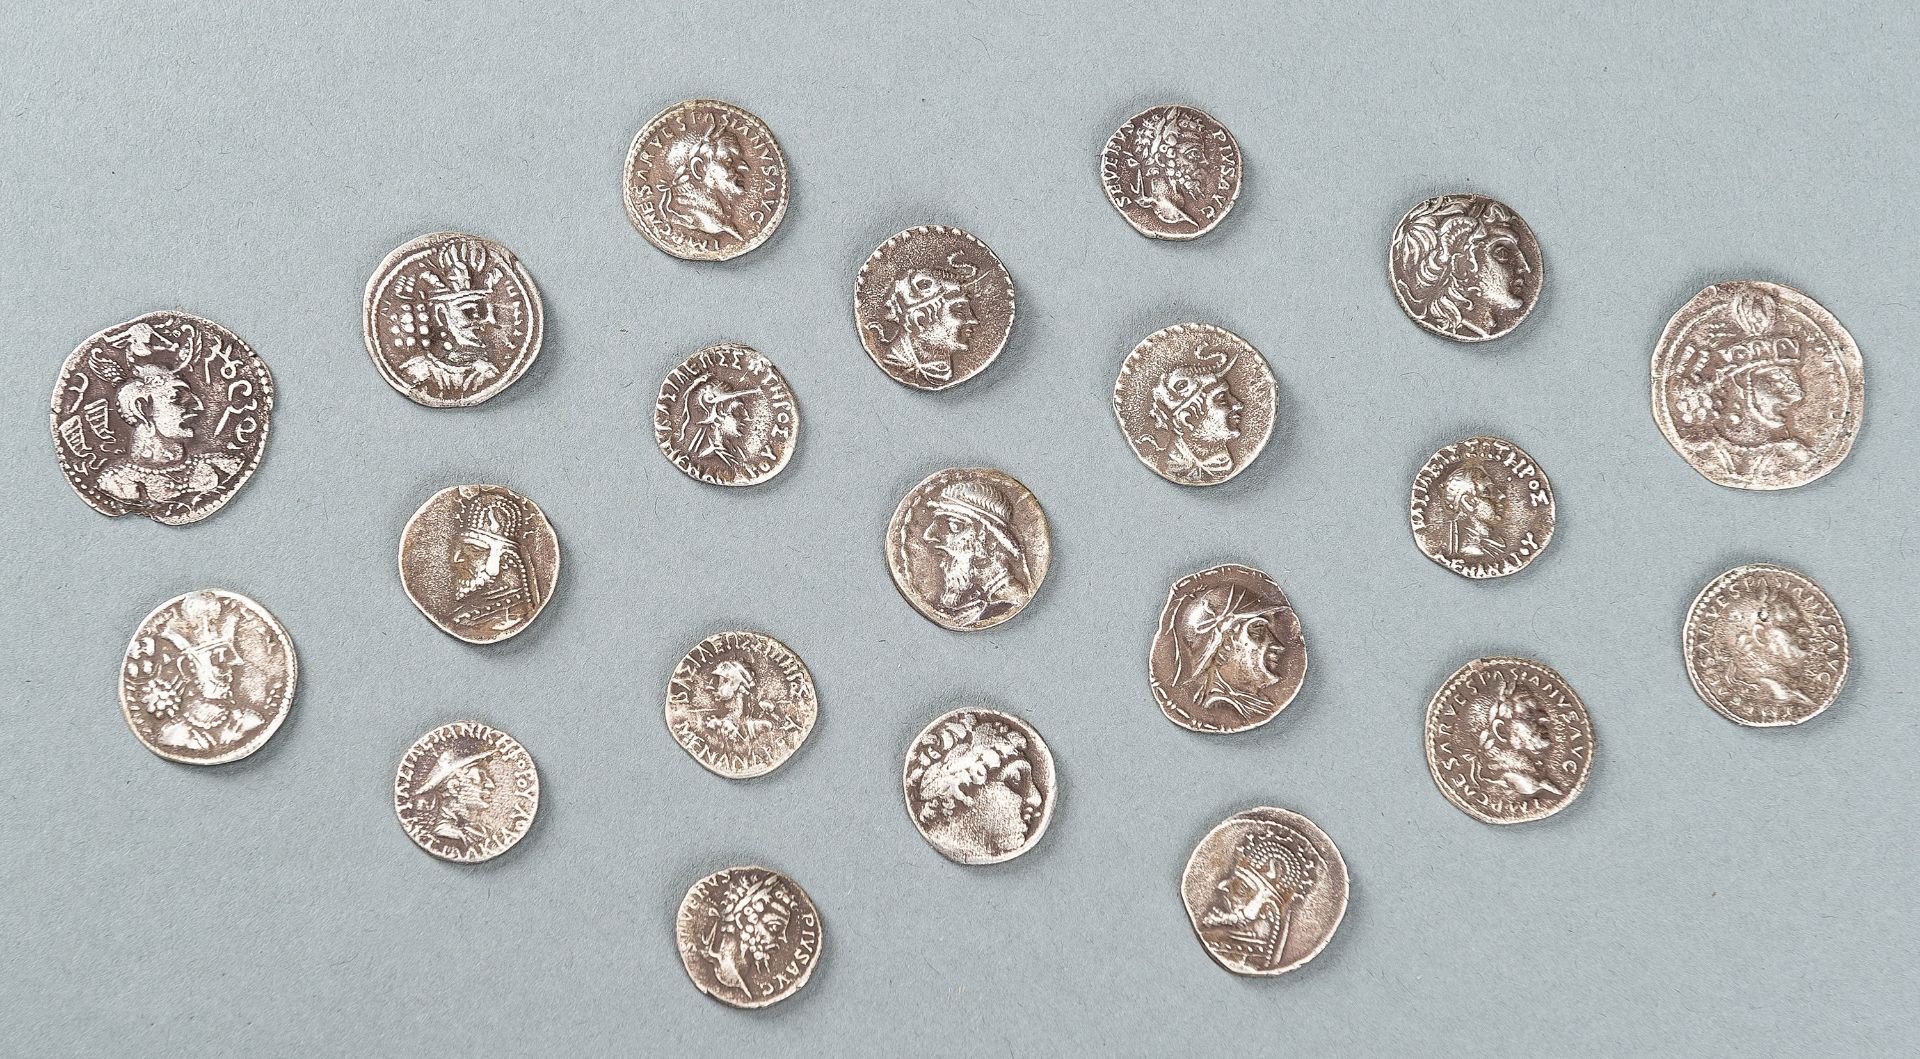 A SET OF 21 INDO-GREEK SILVER COINS